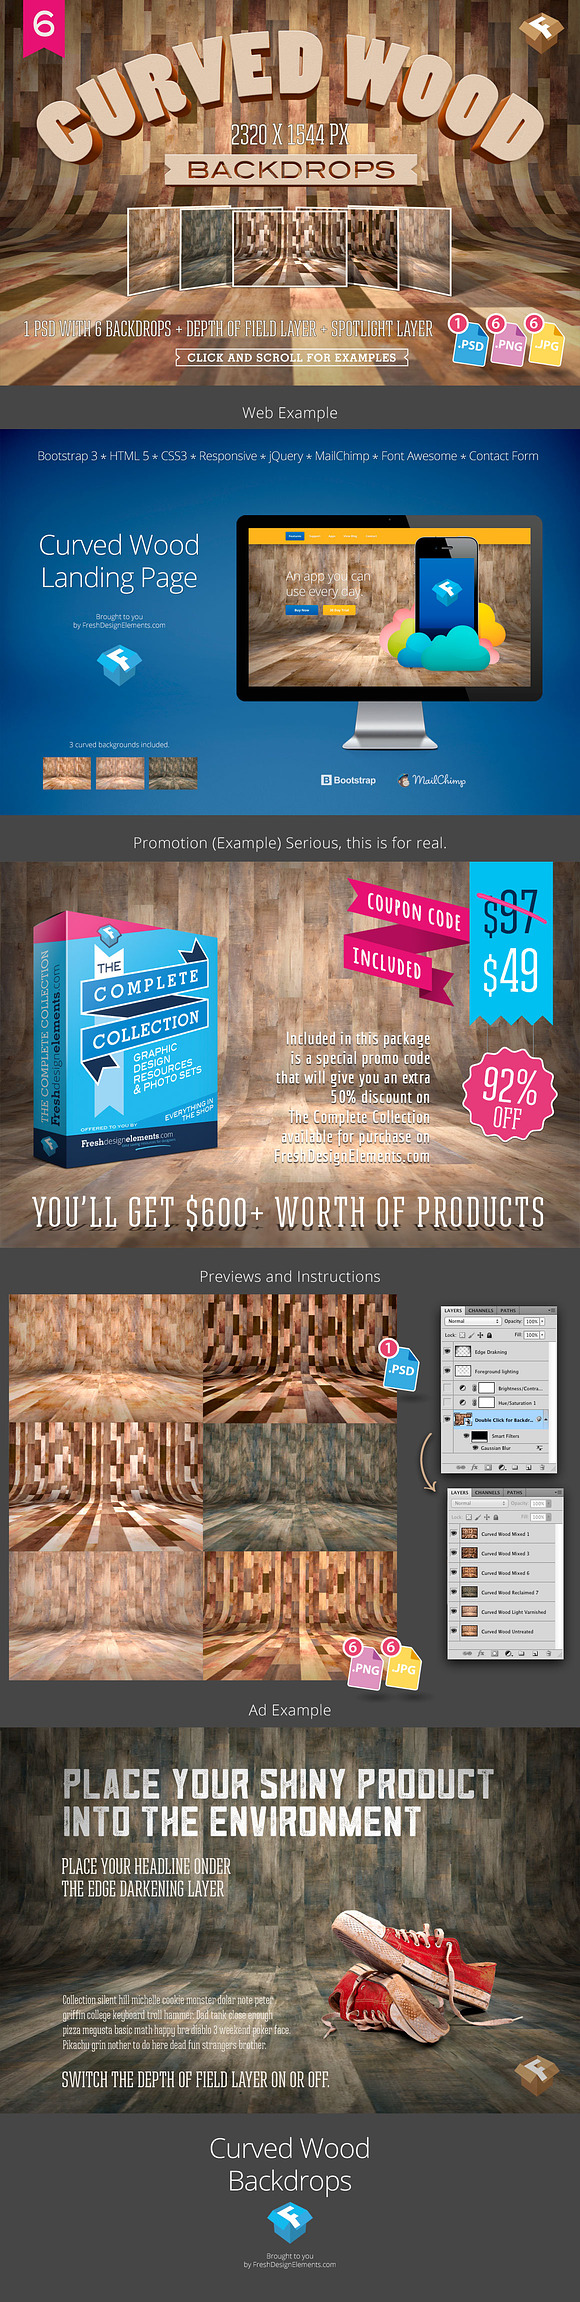 90% Off Best Sellers Design Bundle in Photoshop Layer Styles - product preview 7